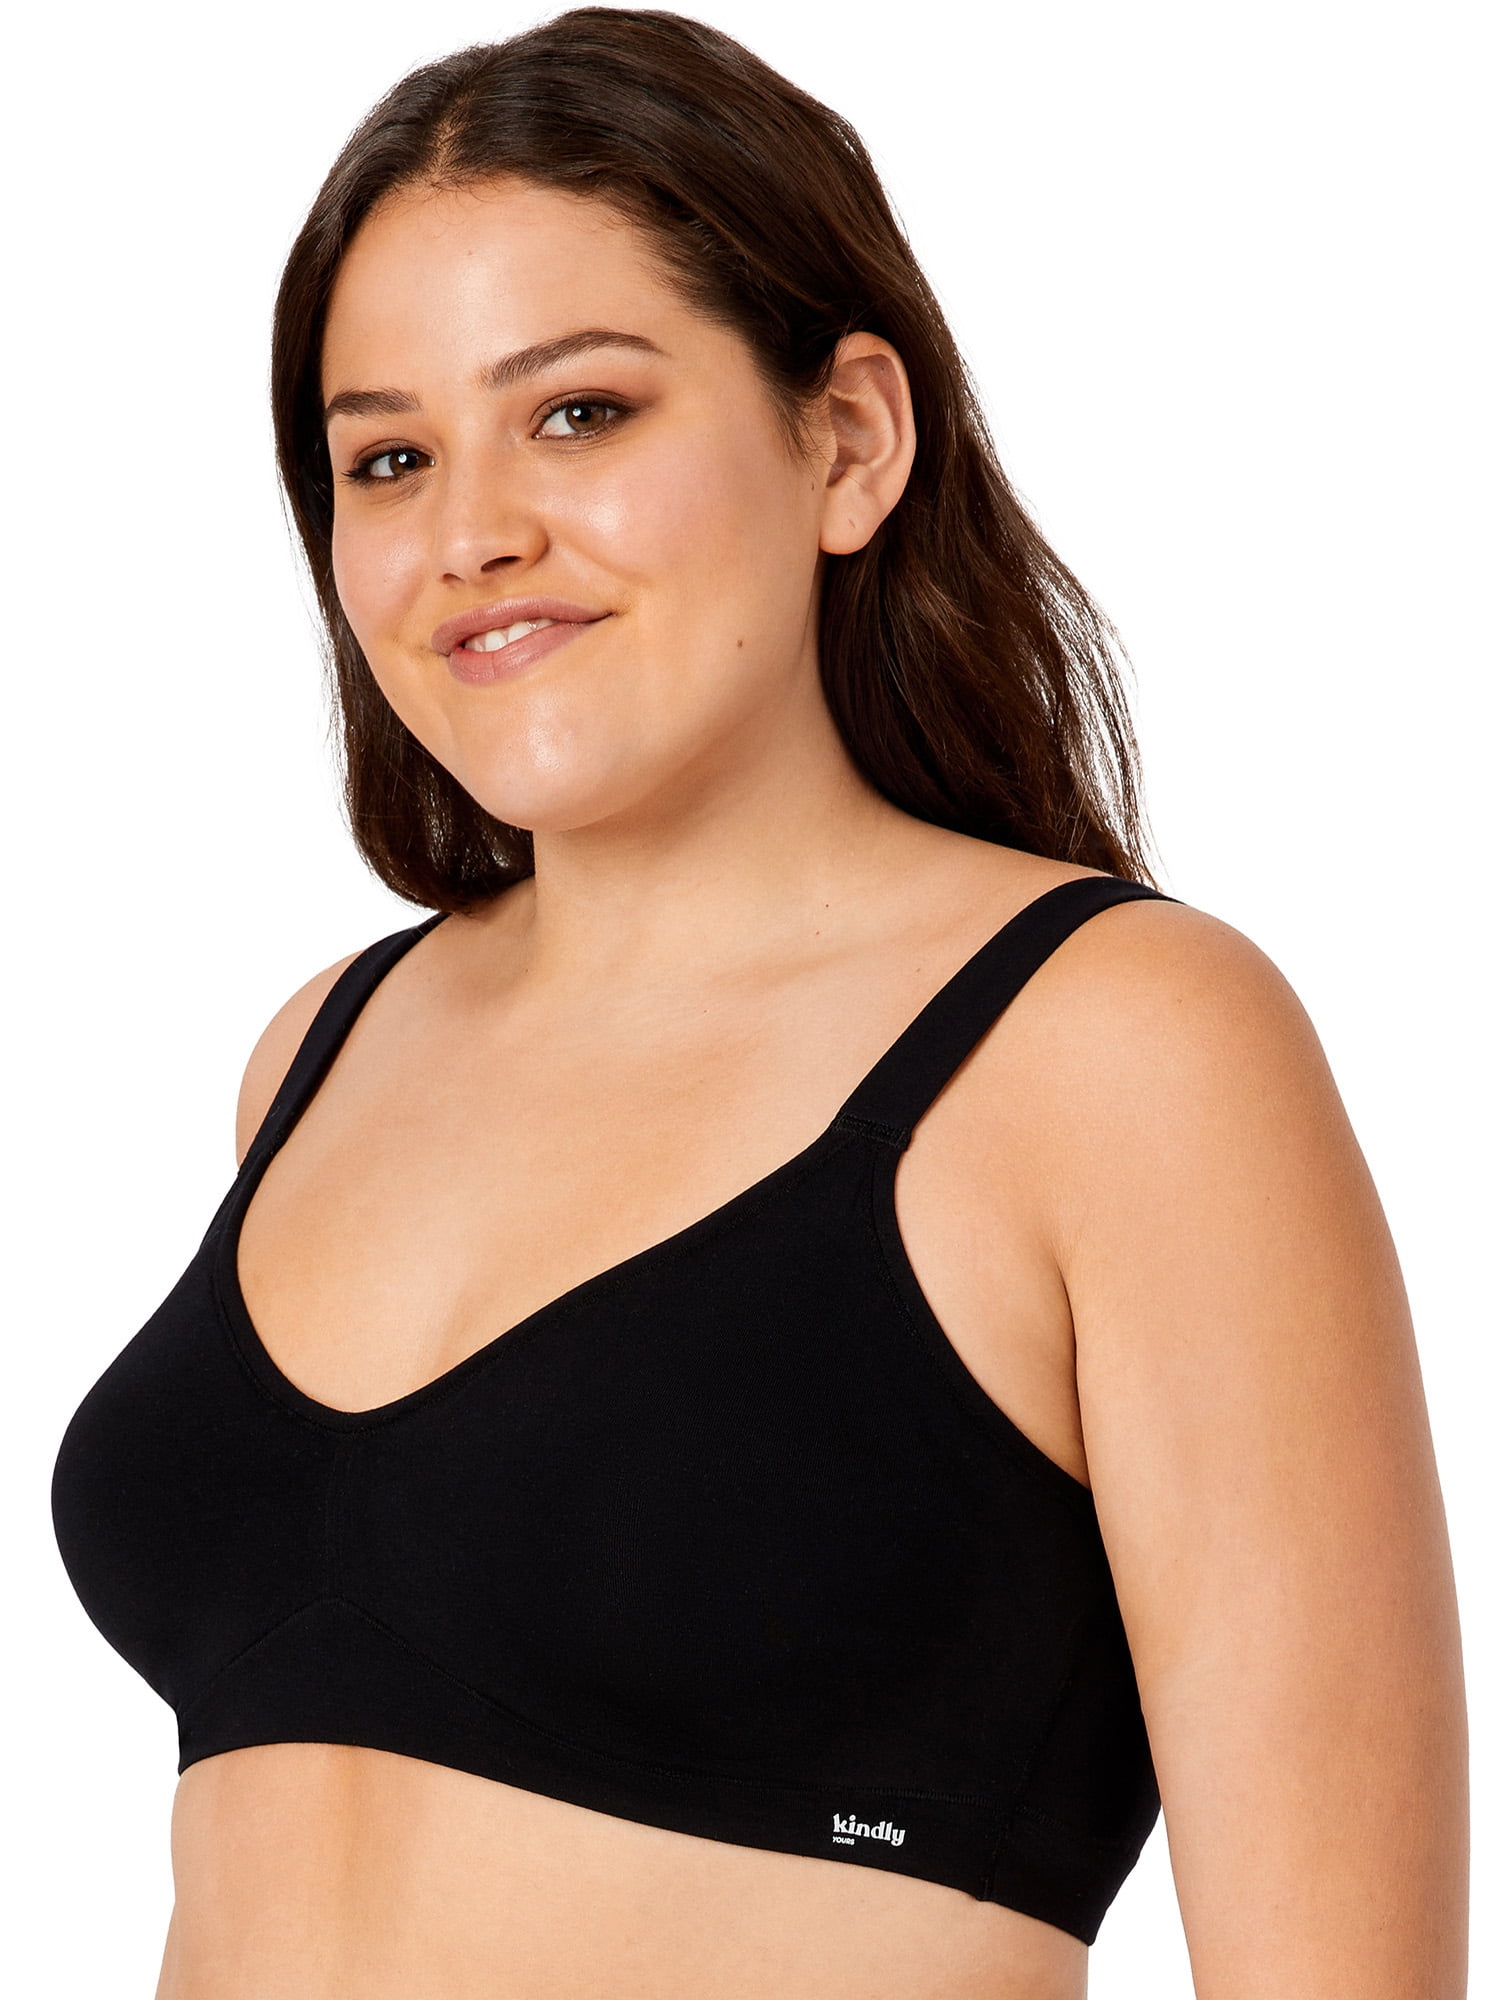 Comfort Yours XXXL to Pullover Modal S Women\'s Kindly Sizes Lounge Bra,